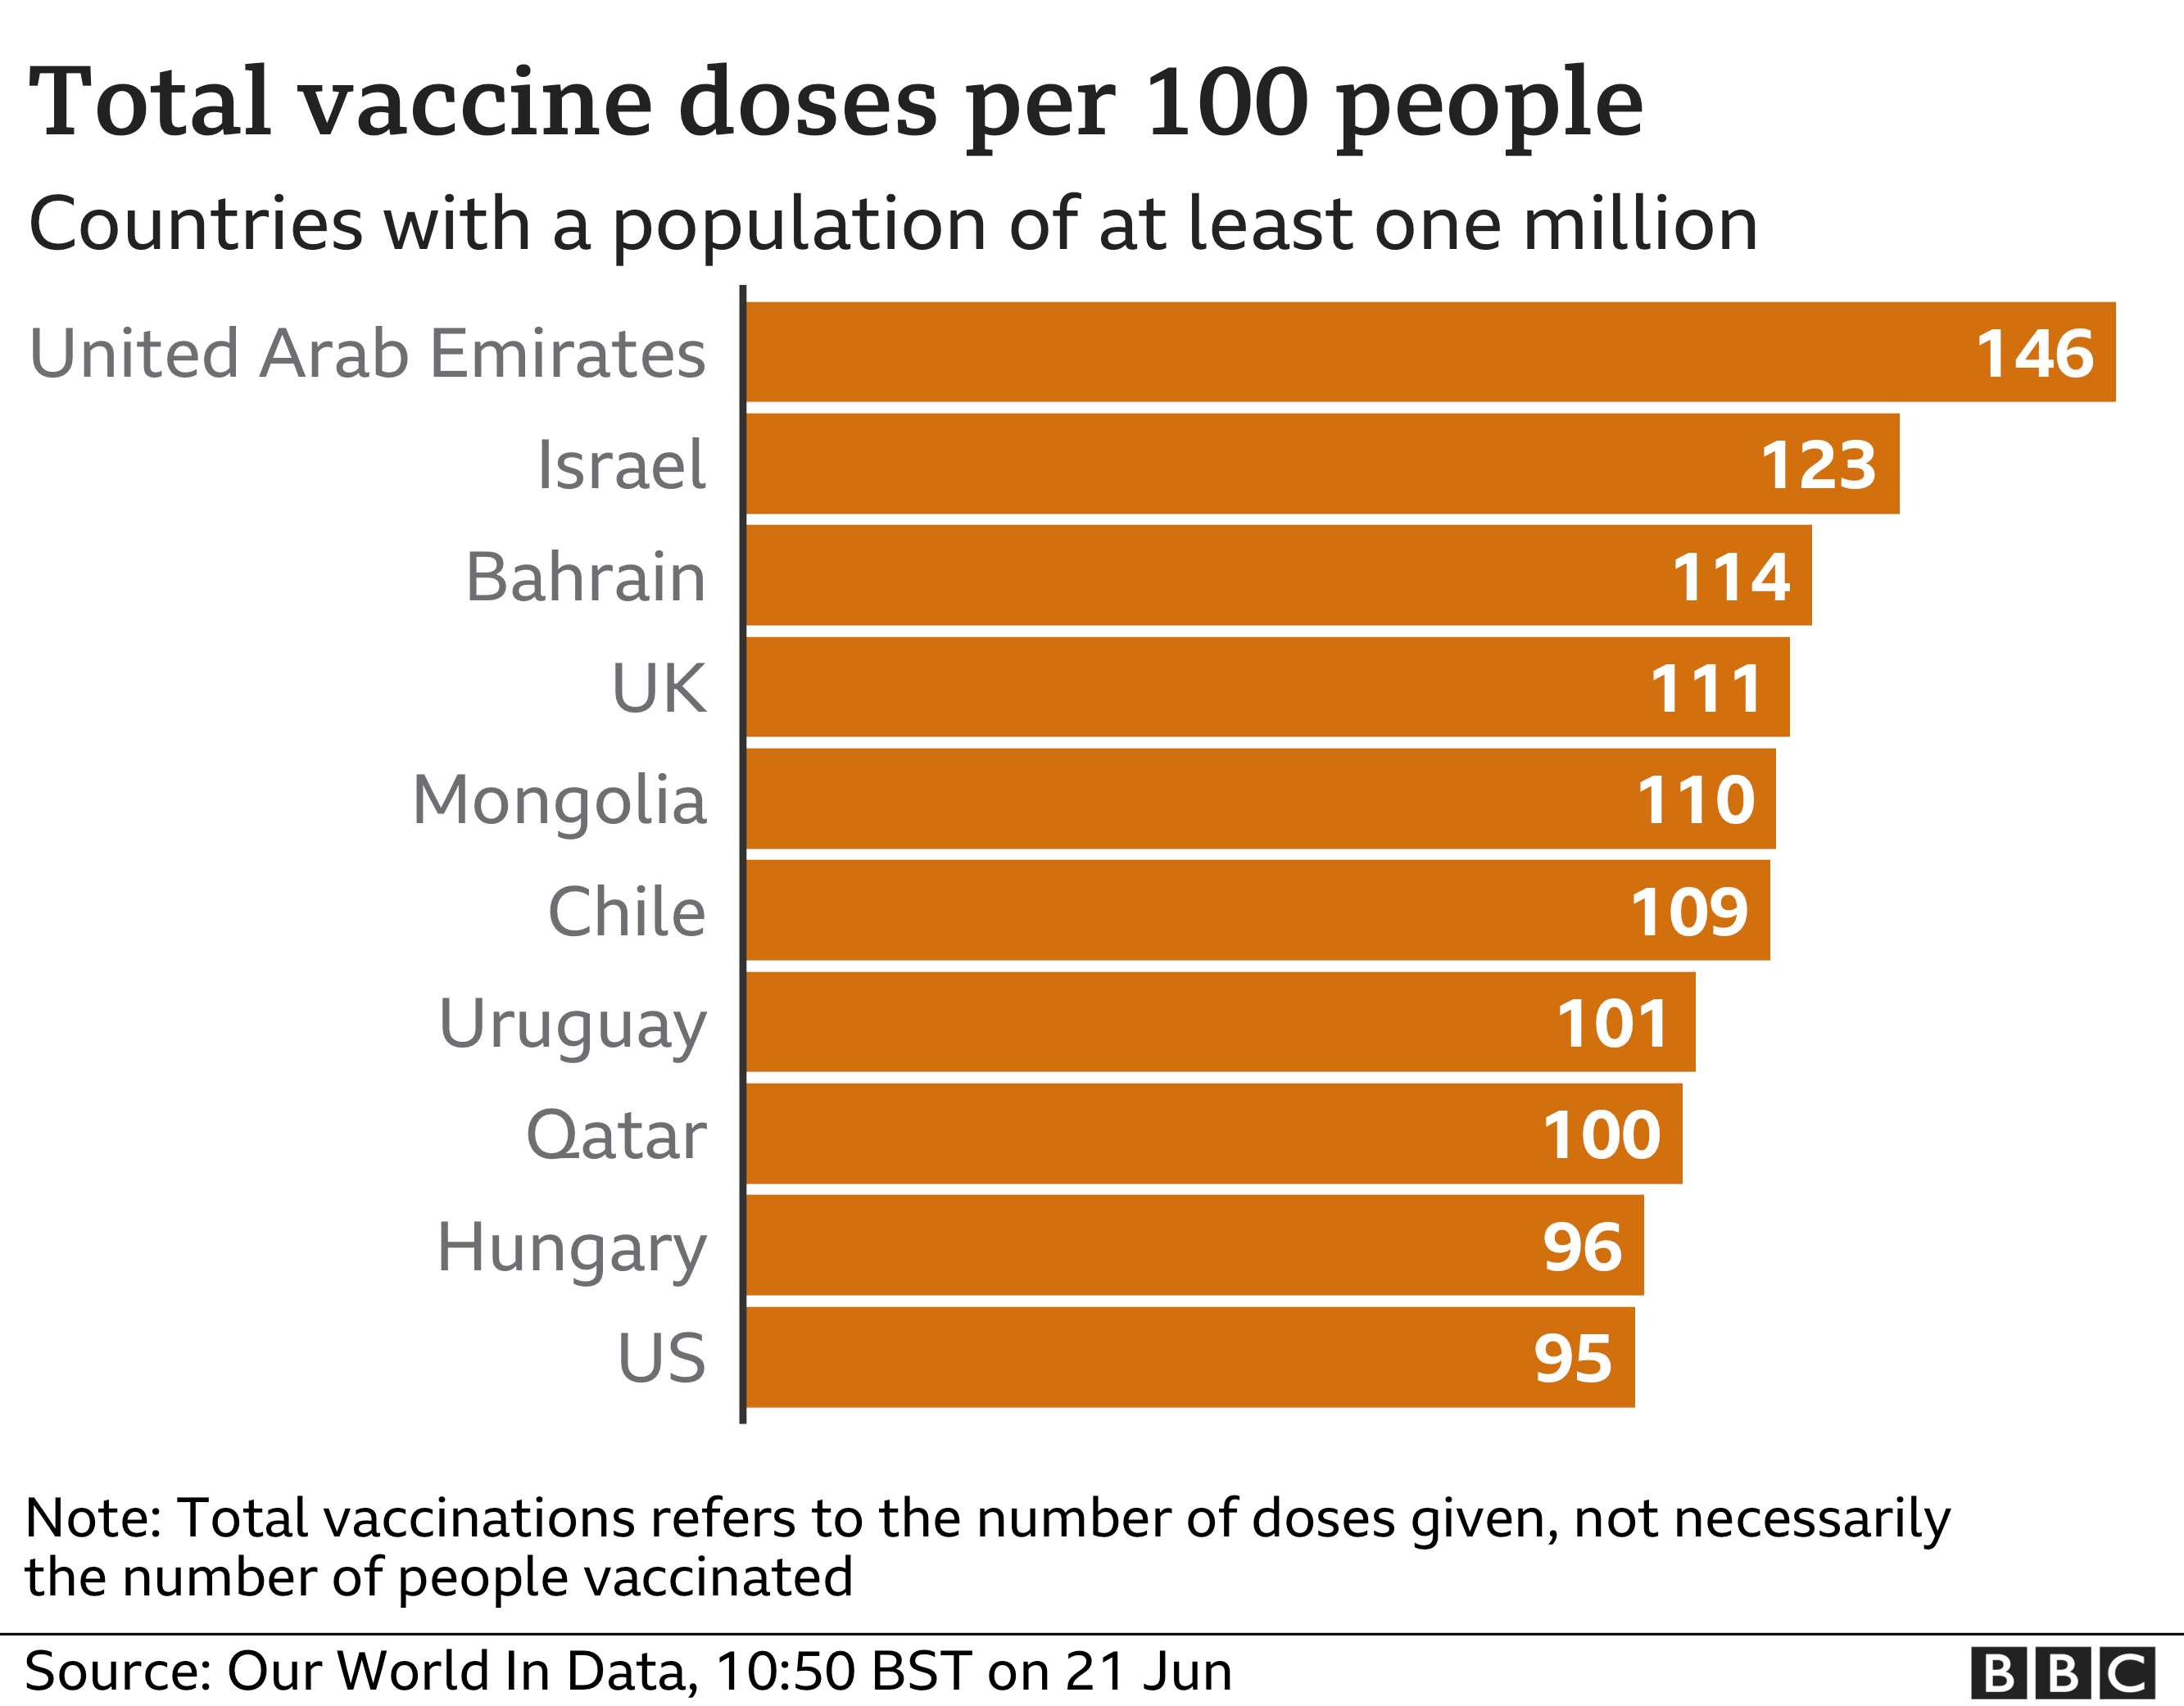 Chart showing vaccine doses per 100 people in countries where the population is over one million Updated 21 June